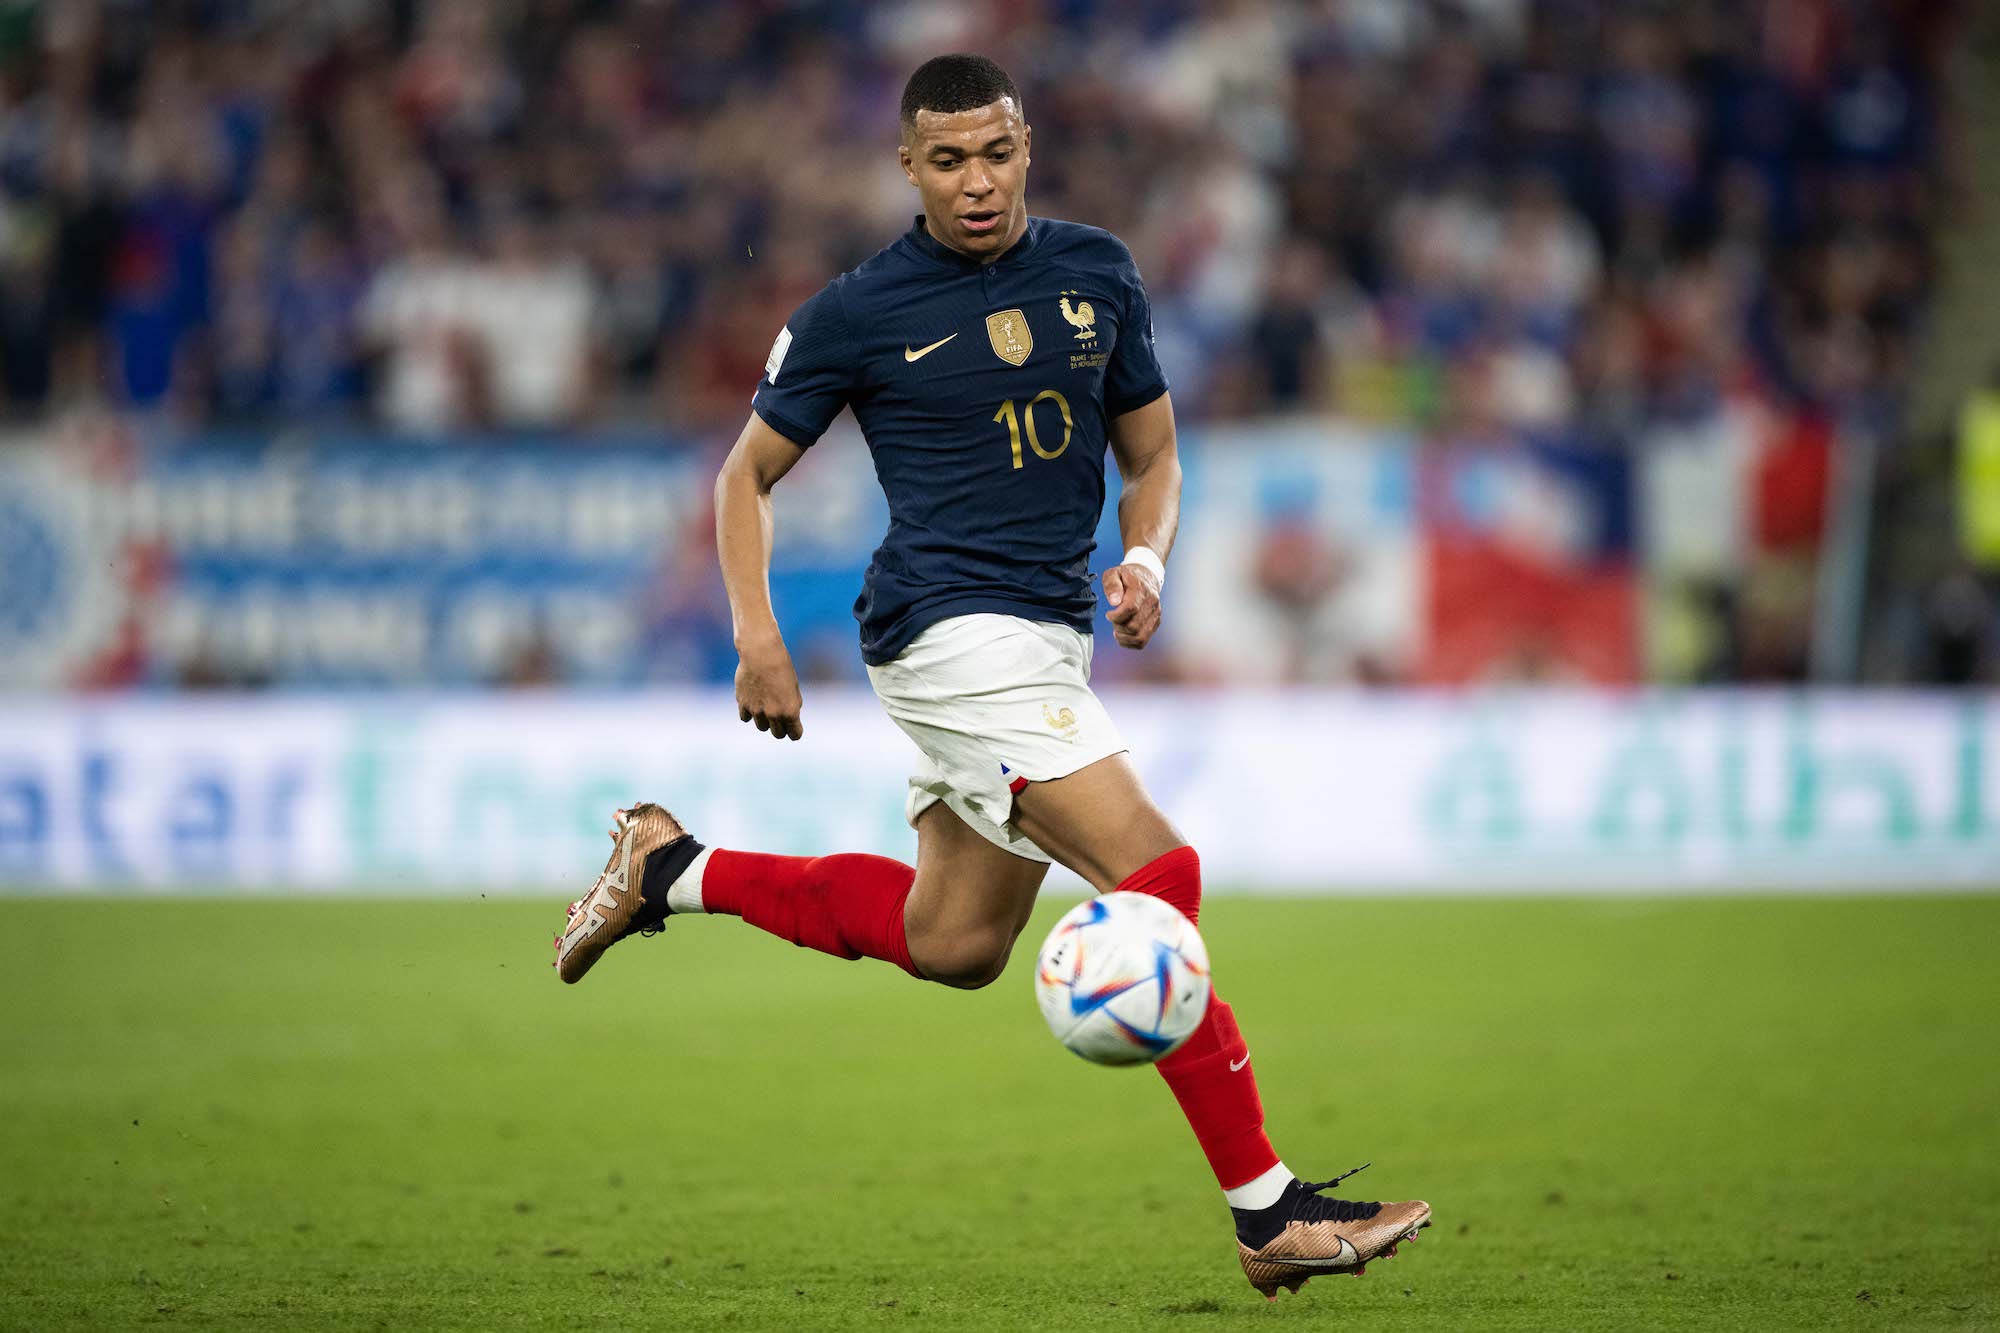 Kylian Mbappé controls the ball during a match against Denmark at Stadium 974 on Saturday.